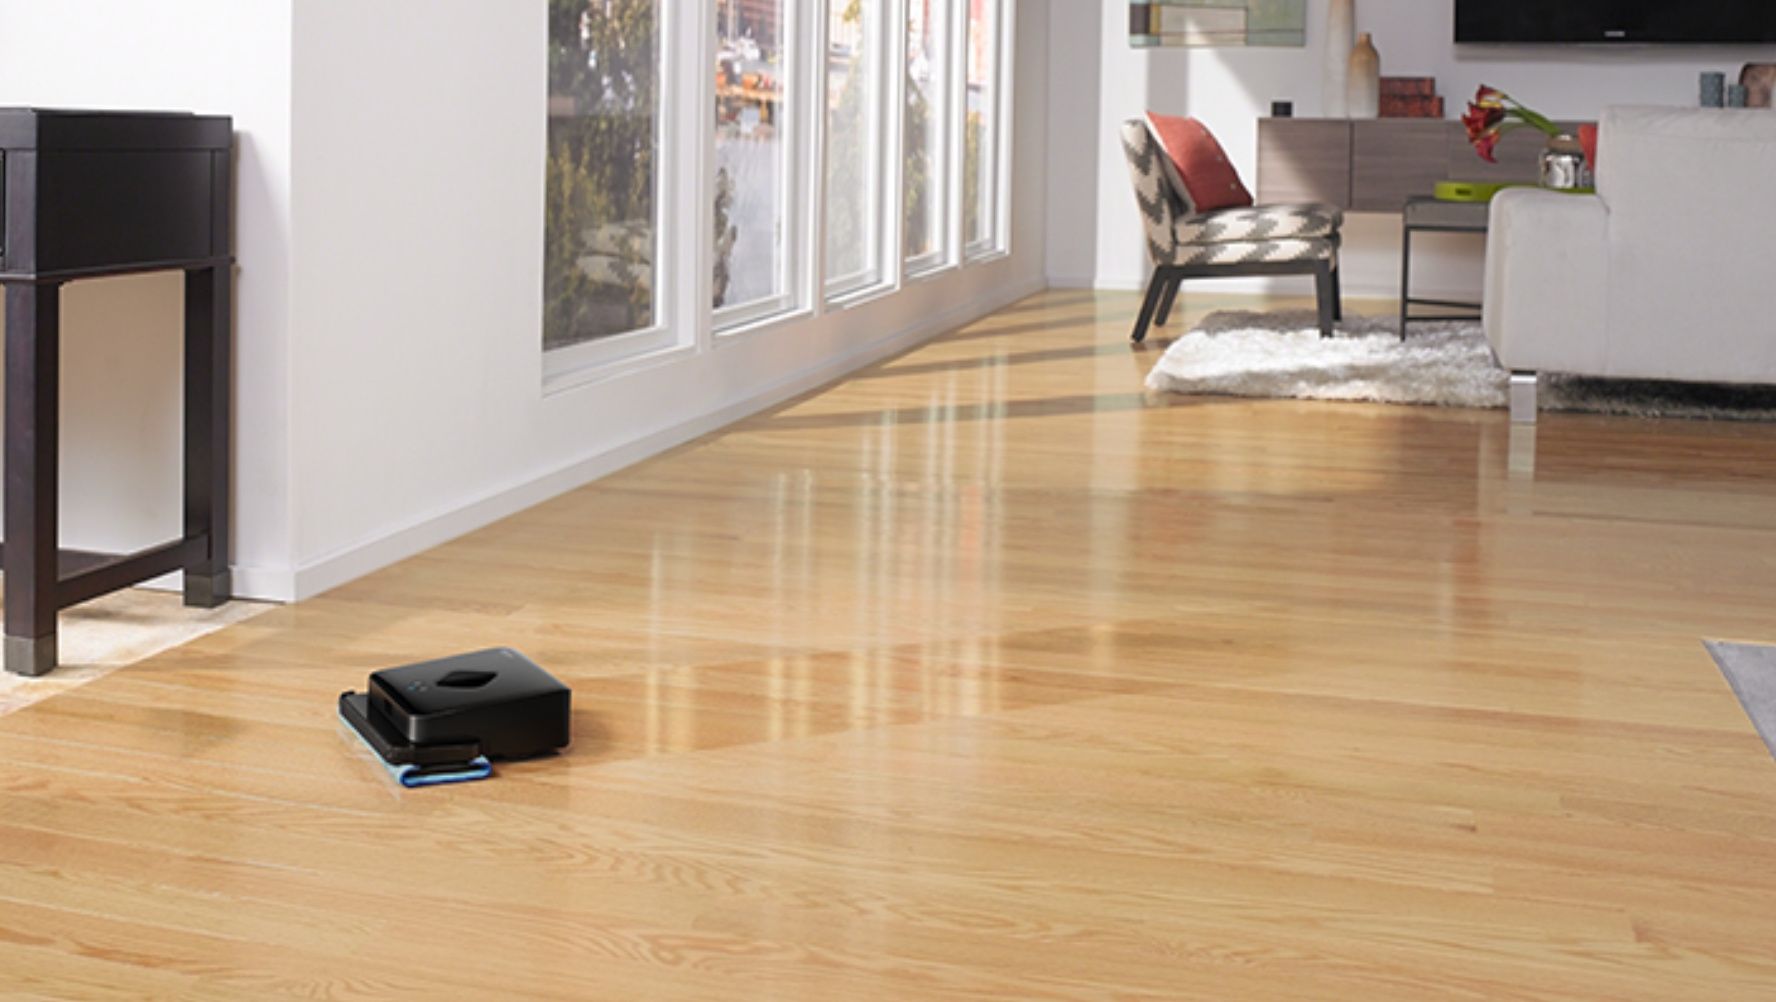 5 smart cleaning devices for your home